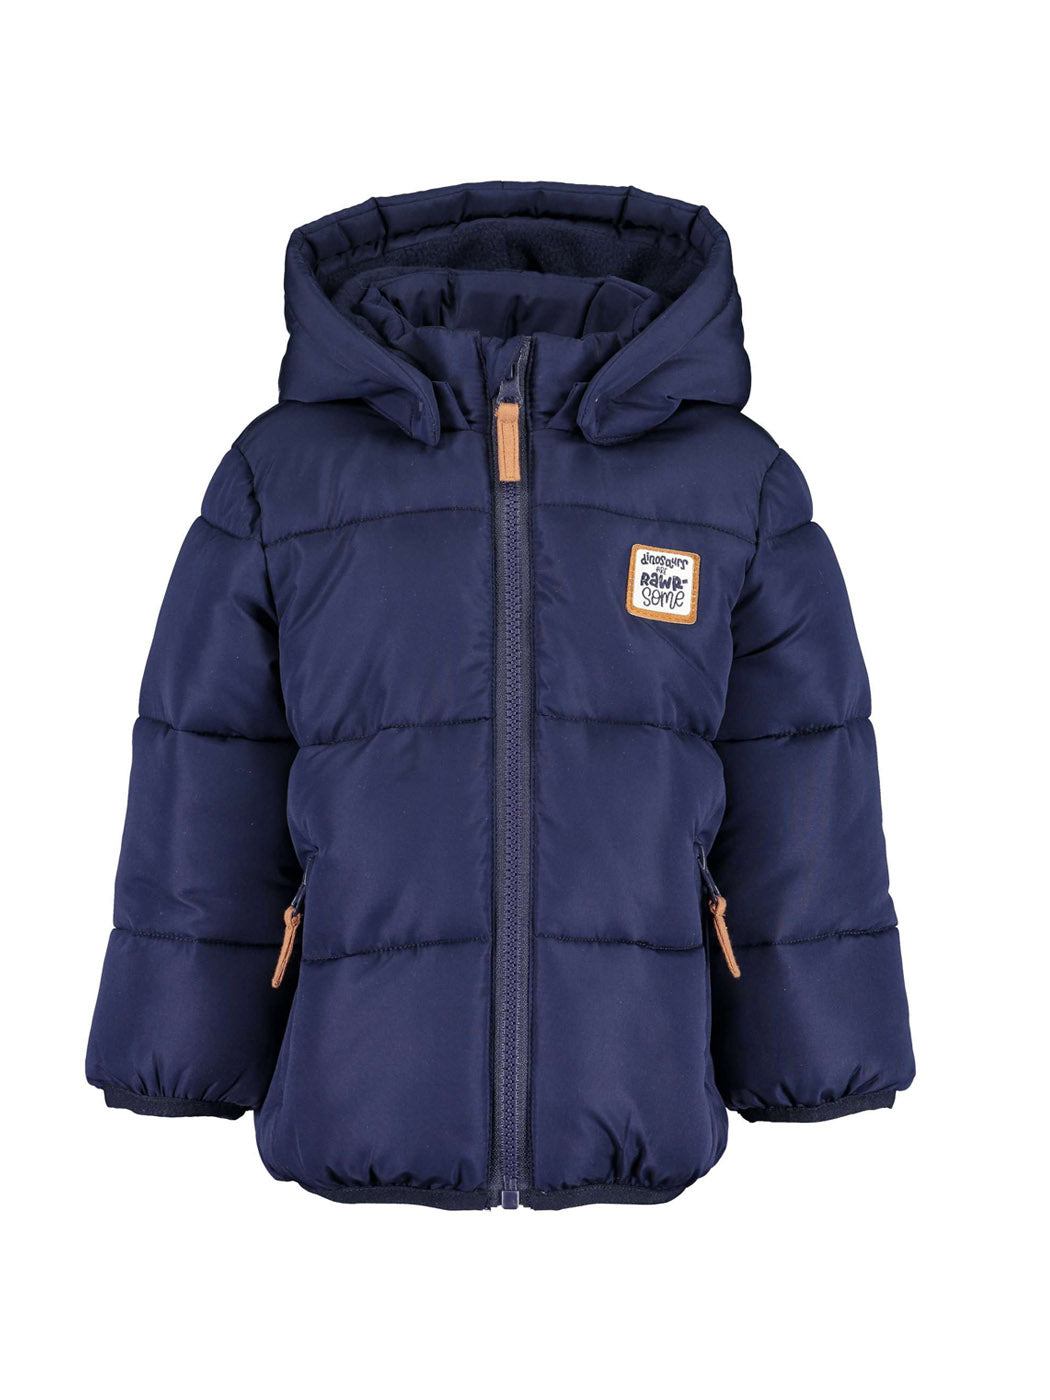 BLUE SEVEN Baby's Jacket for boy - 997519 Blue